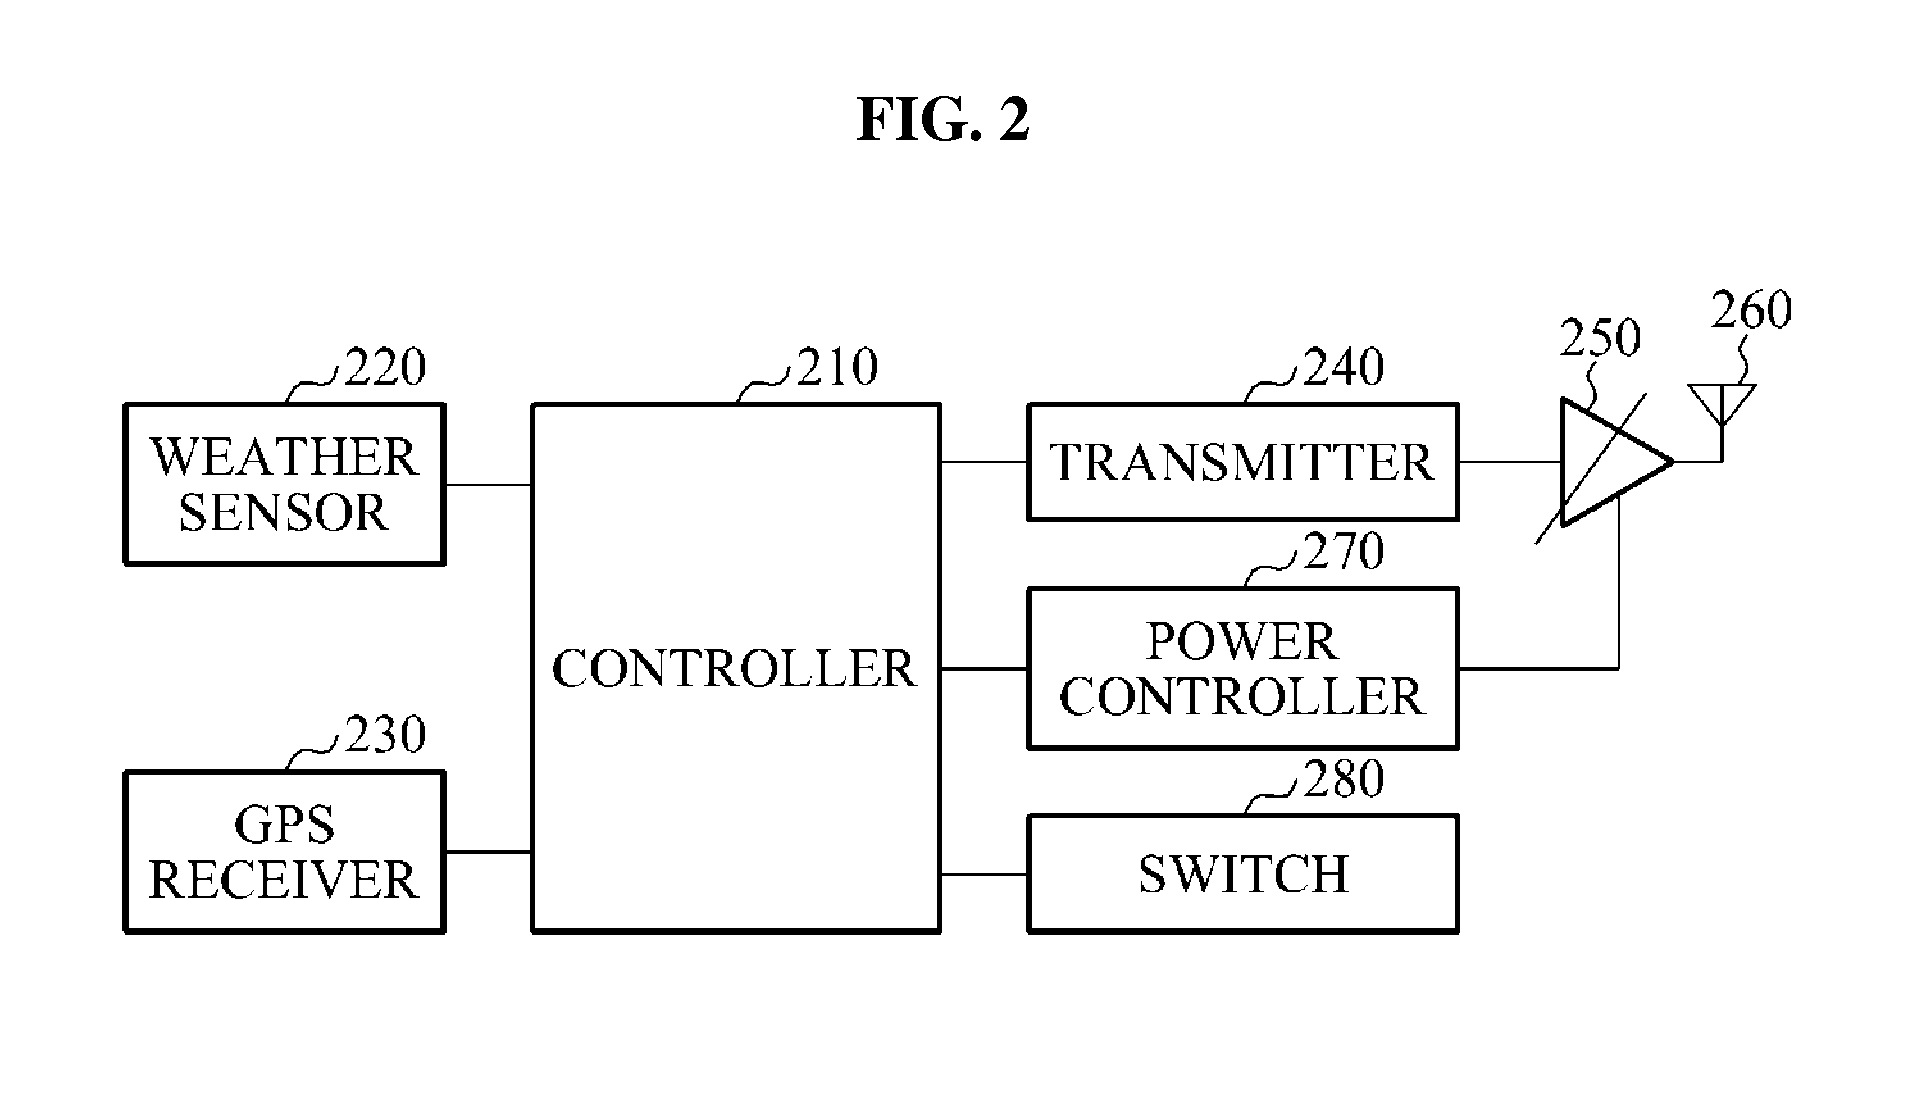 Apparatus and method for radiosonde power control based on position estimation